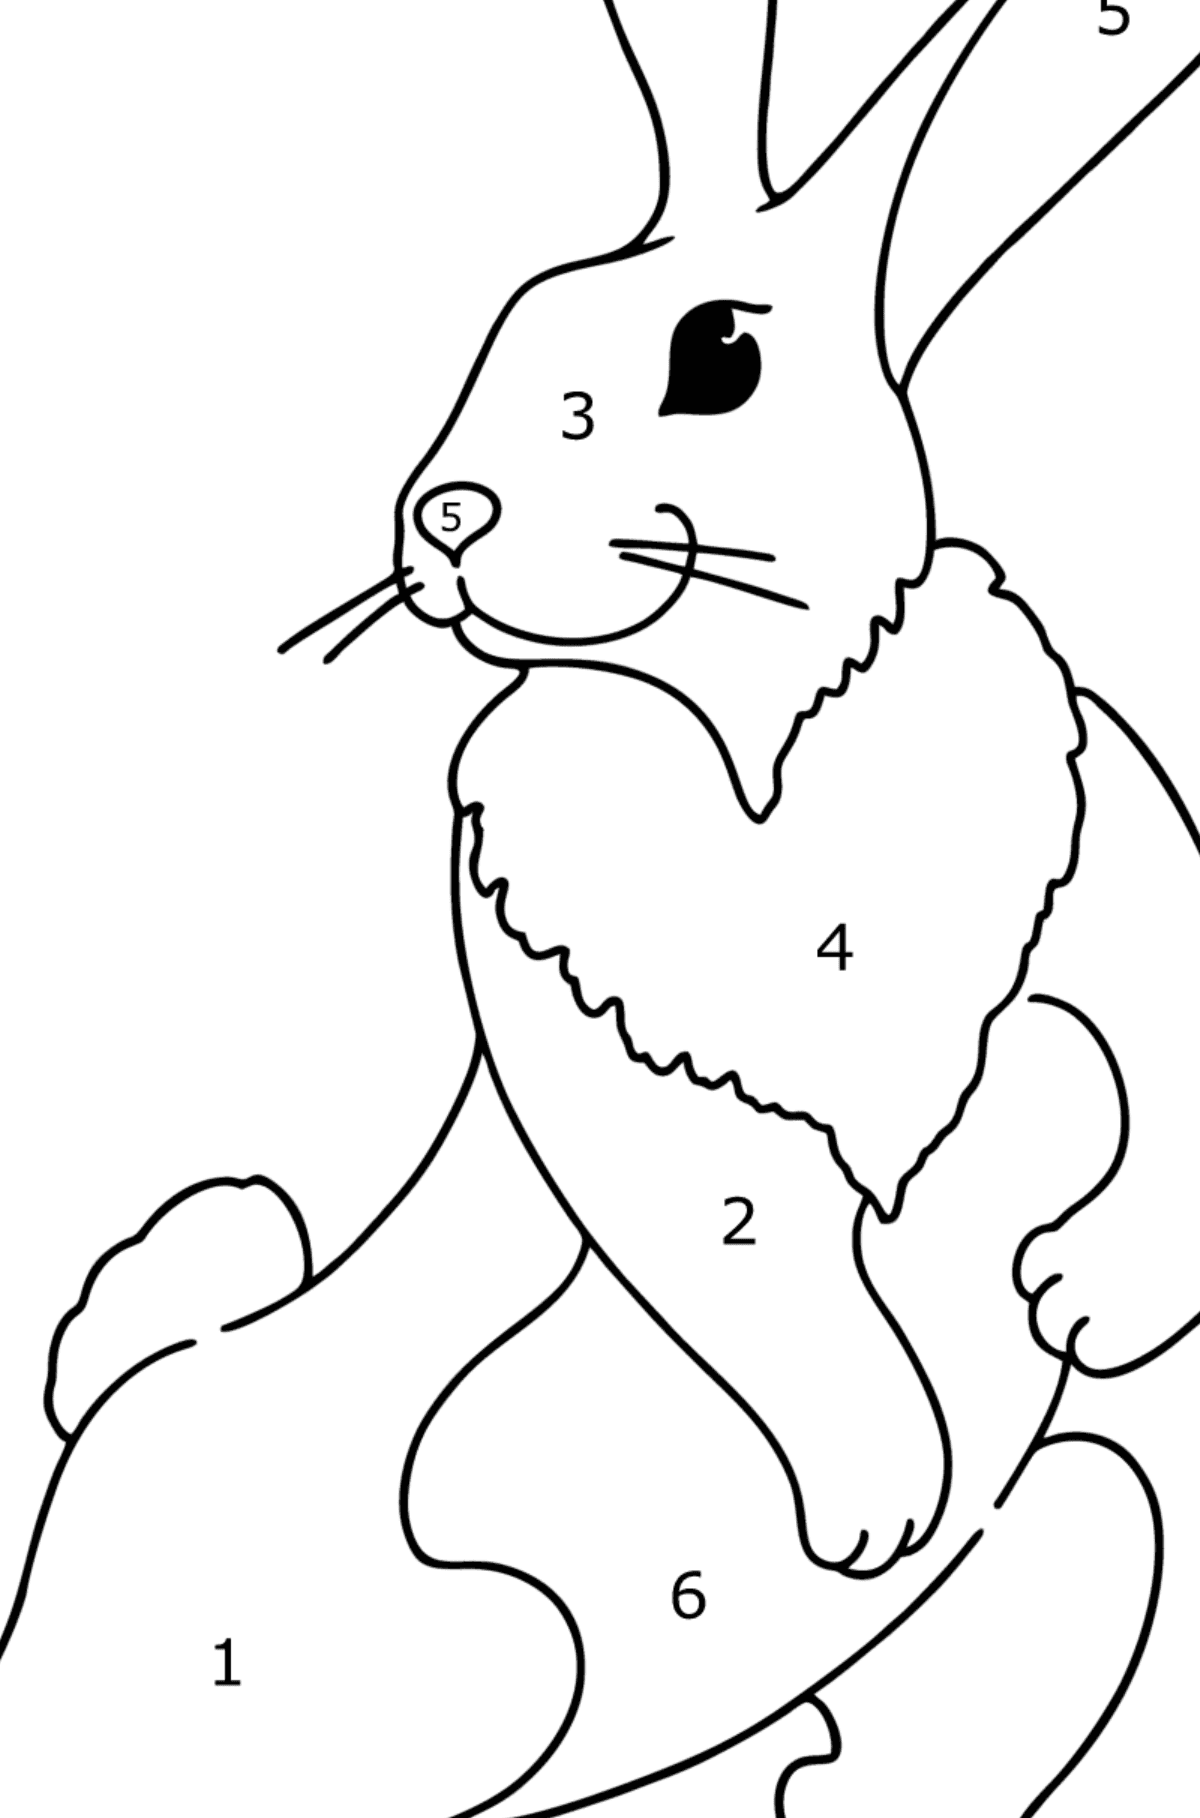 Playful Bunny coloring page - Coloring by Numbers for Kids